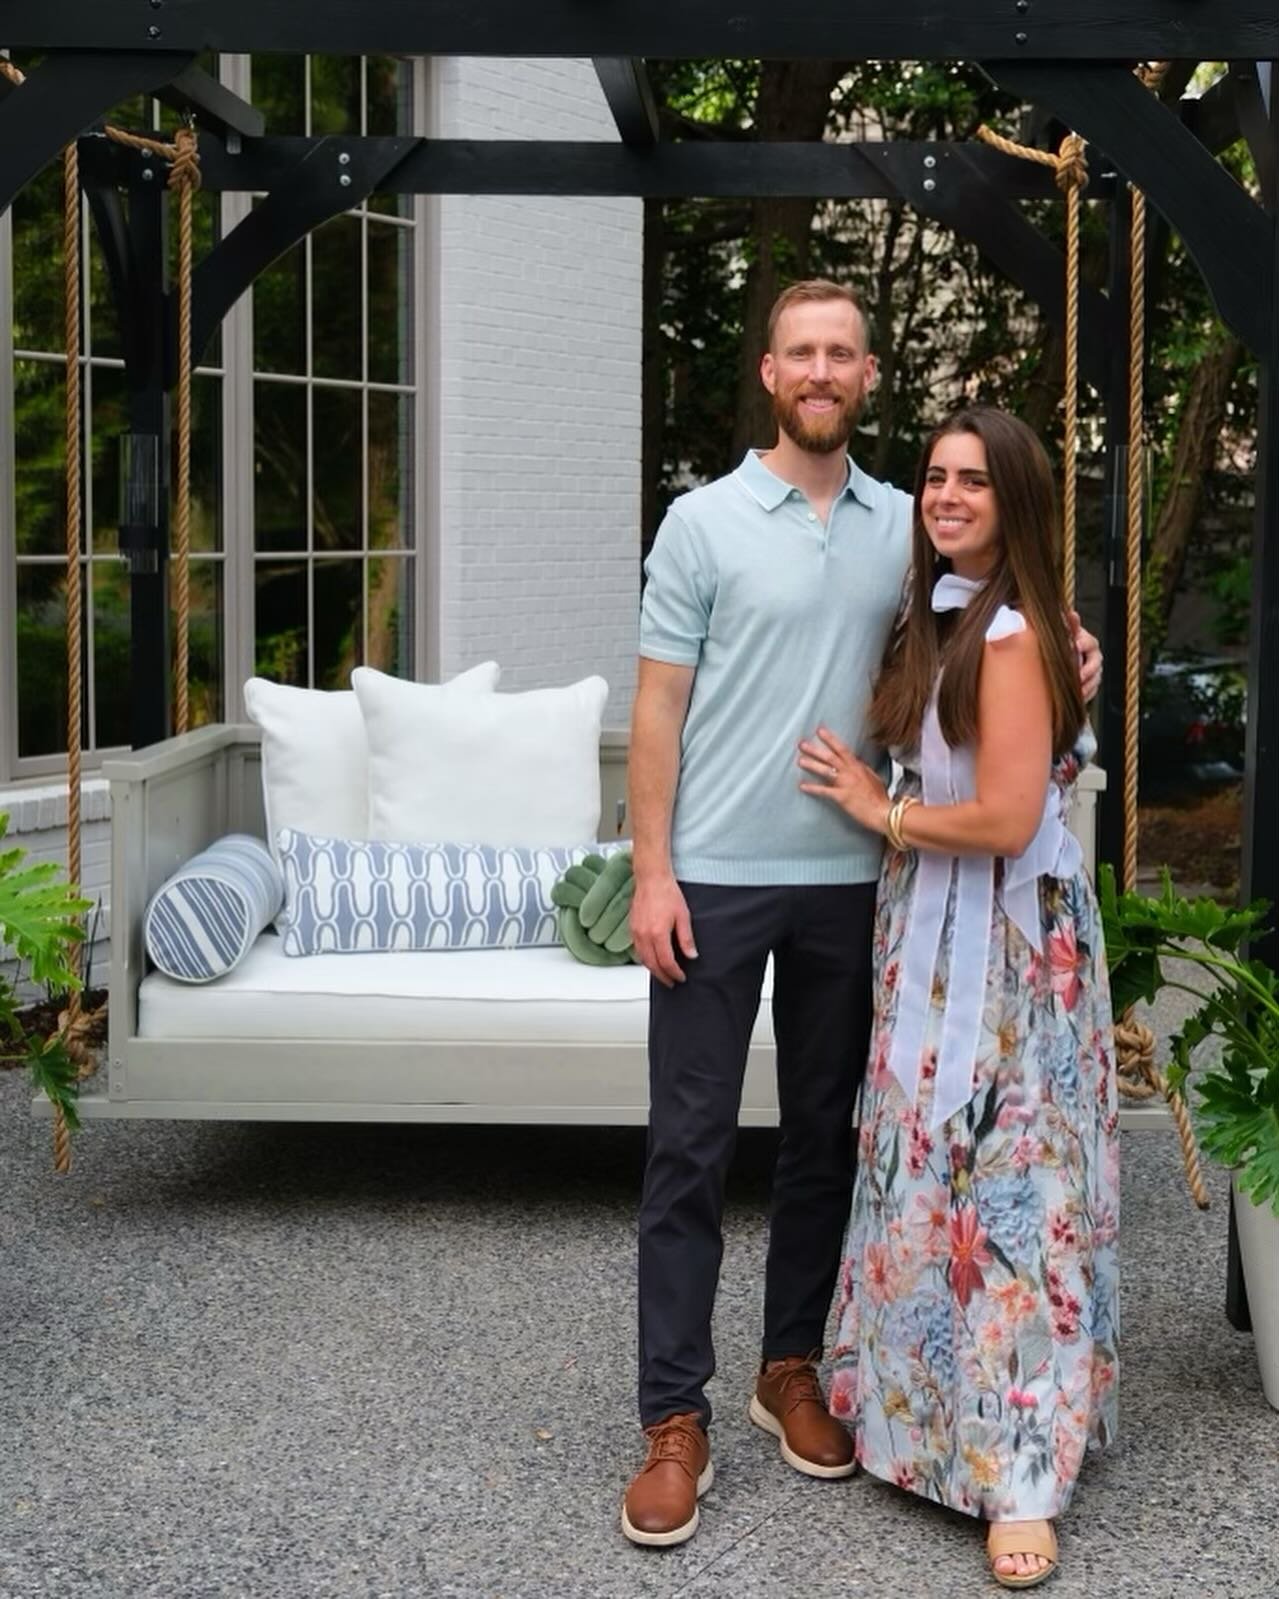 What an absolutely magical night at @southeasternshowhouse put on by @atlantahomesmag !! Special thanks to @jenniferchanaberry for believing in us, to @thibaut_1886 for outfitting our swing with gorgeous fabric, to @shopmelbourneclothing for making m